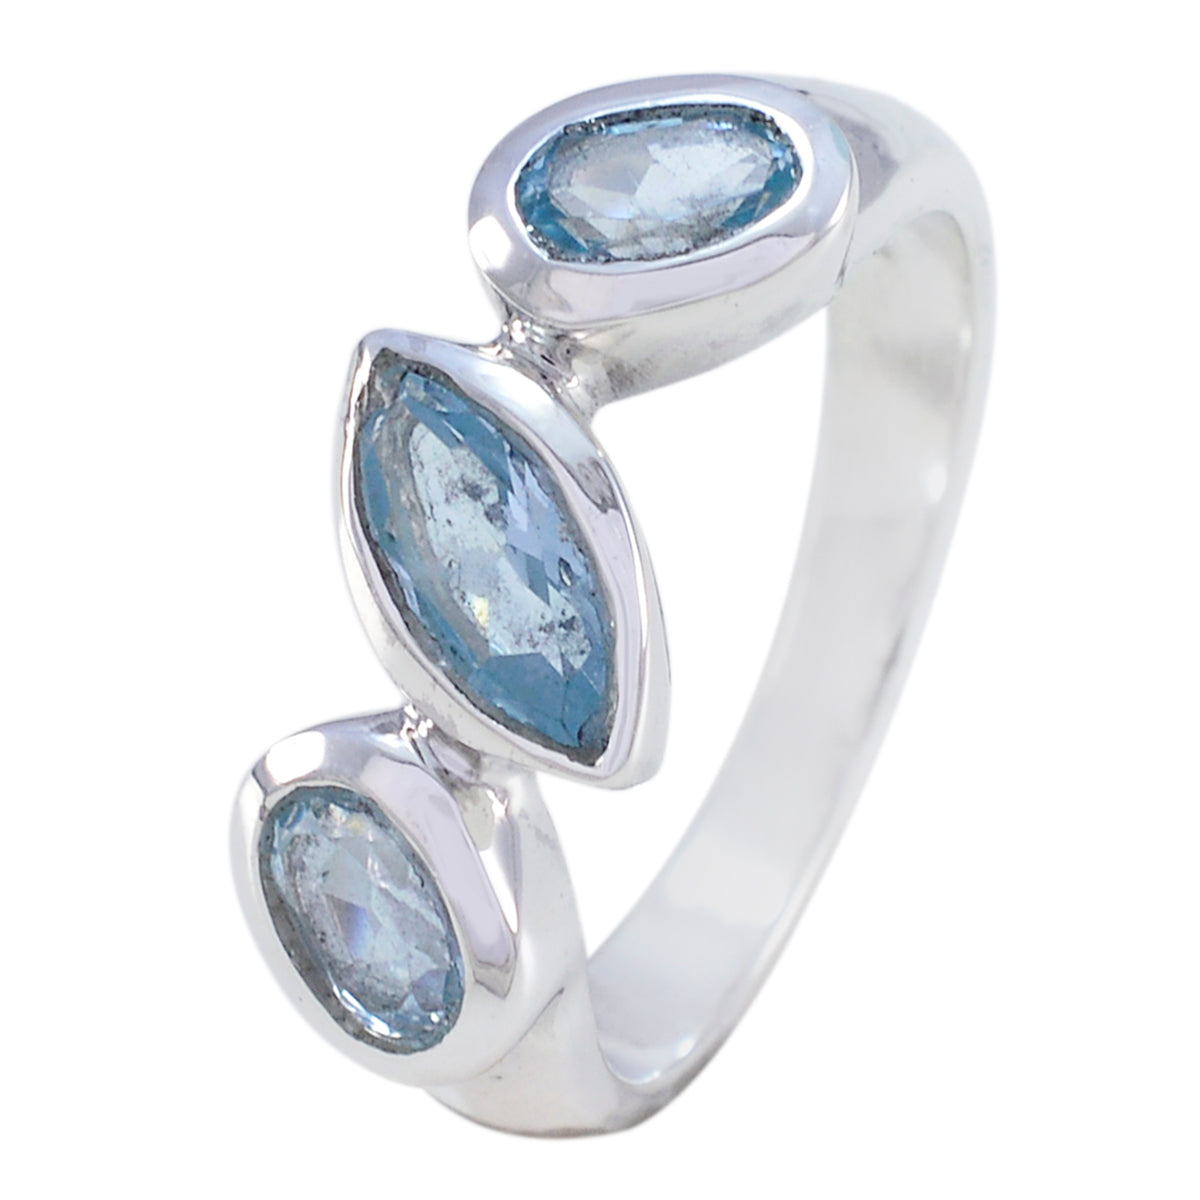 Ravishing Stone Blue Topaz 925 Sterling Silver Rings Justice Jewelry